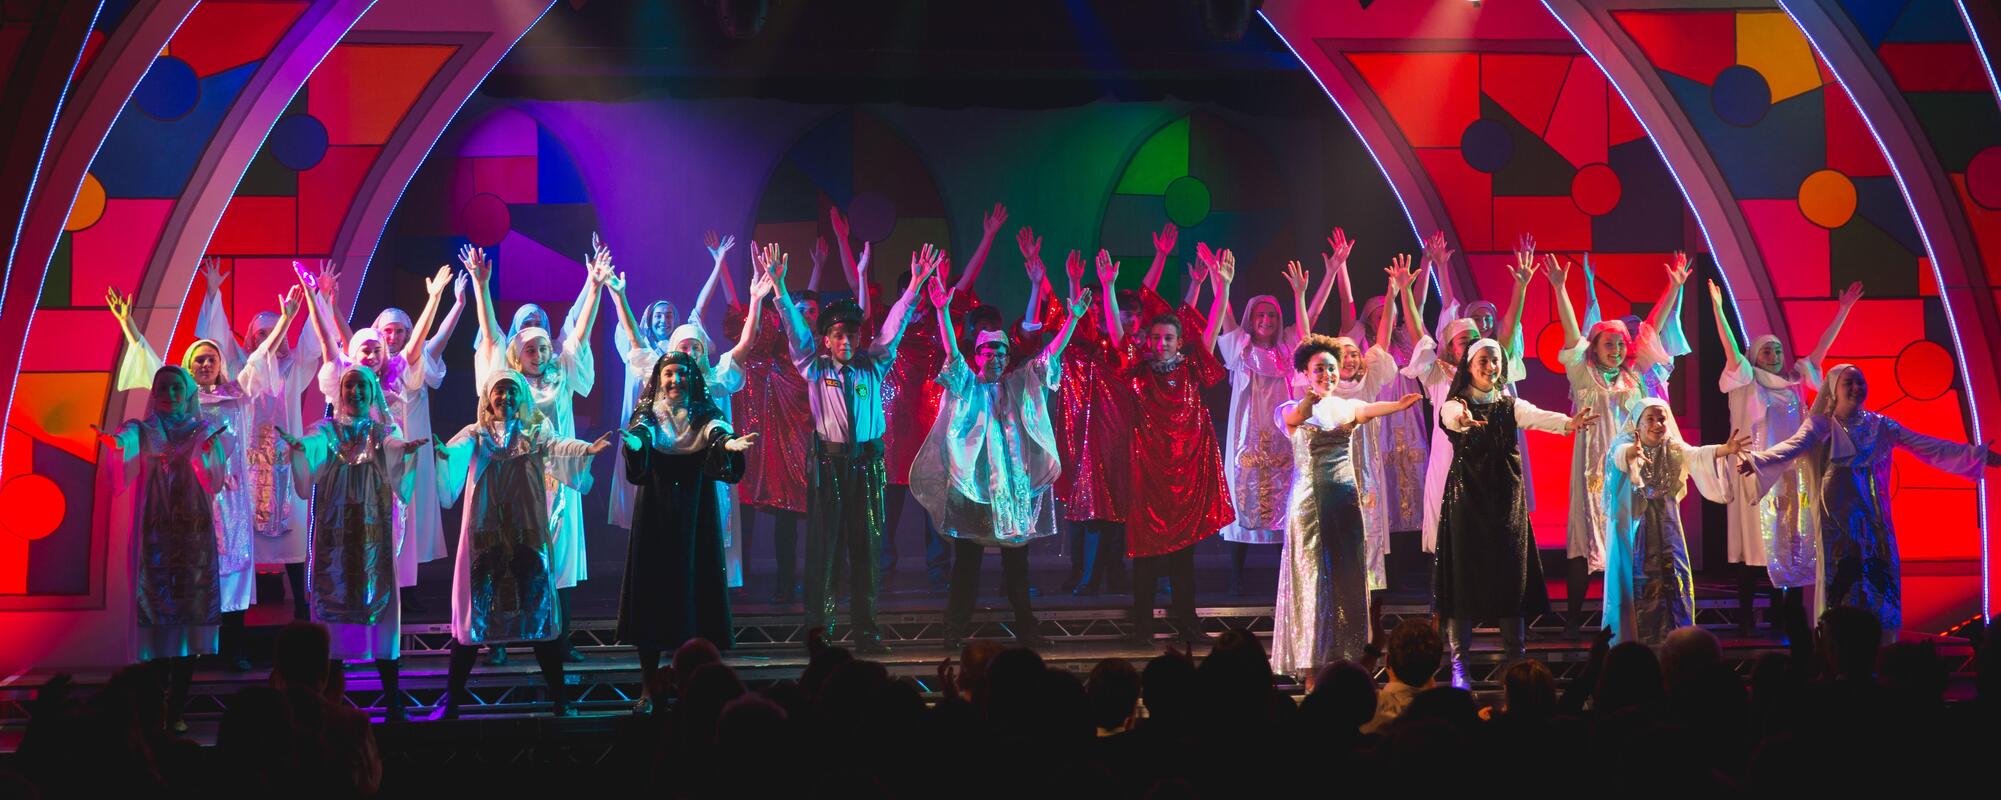 Photograph from Sister Act the Musical - lighting design by oliverh57